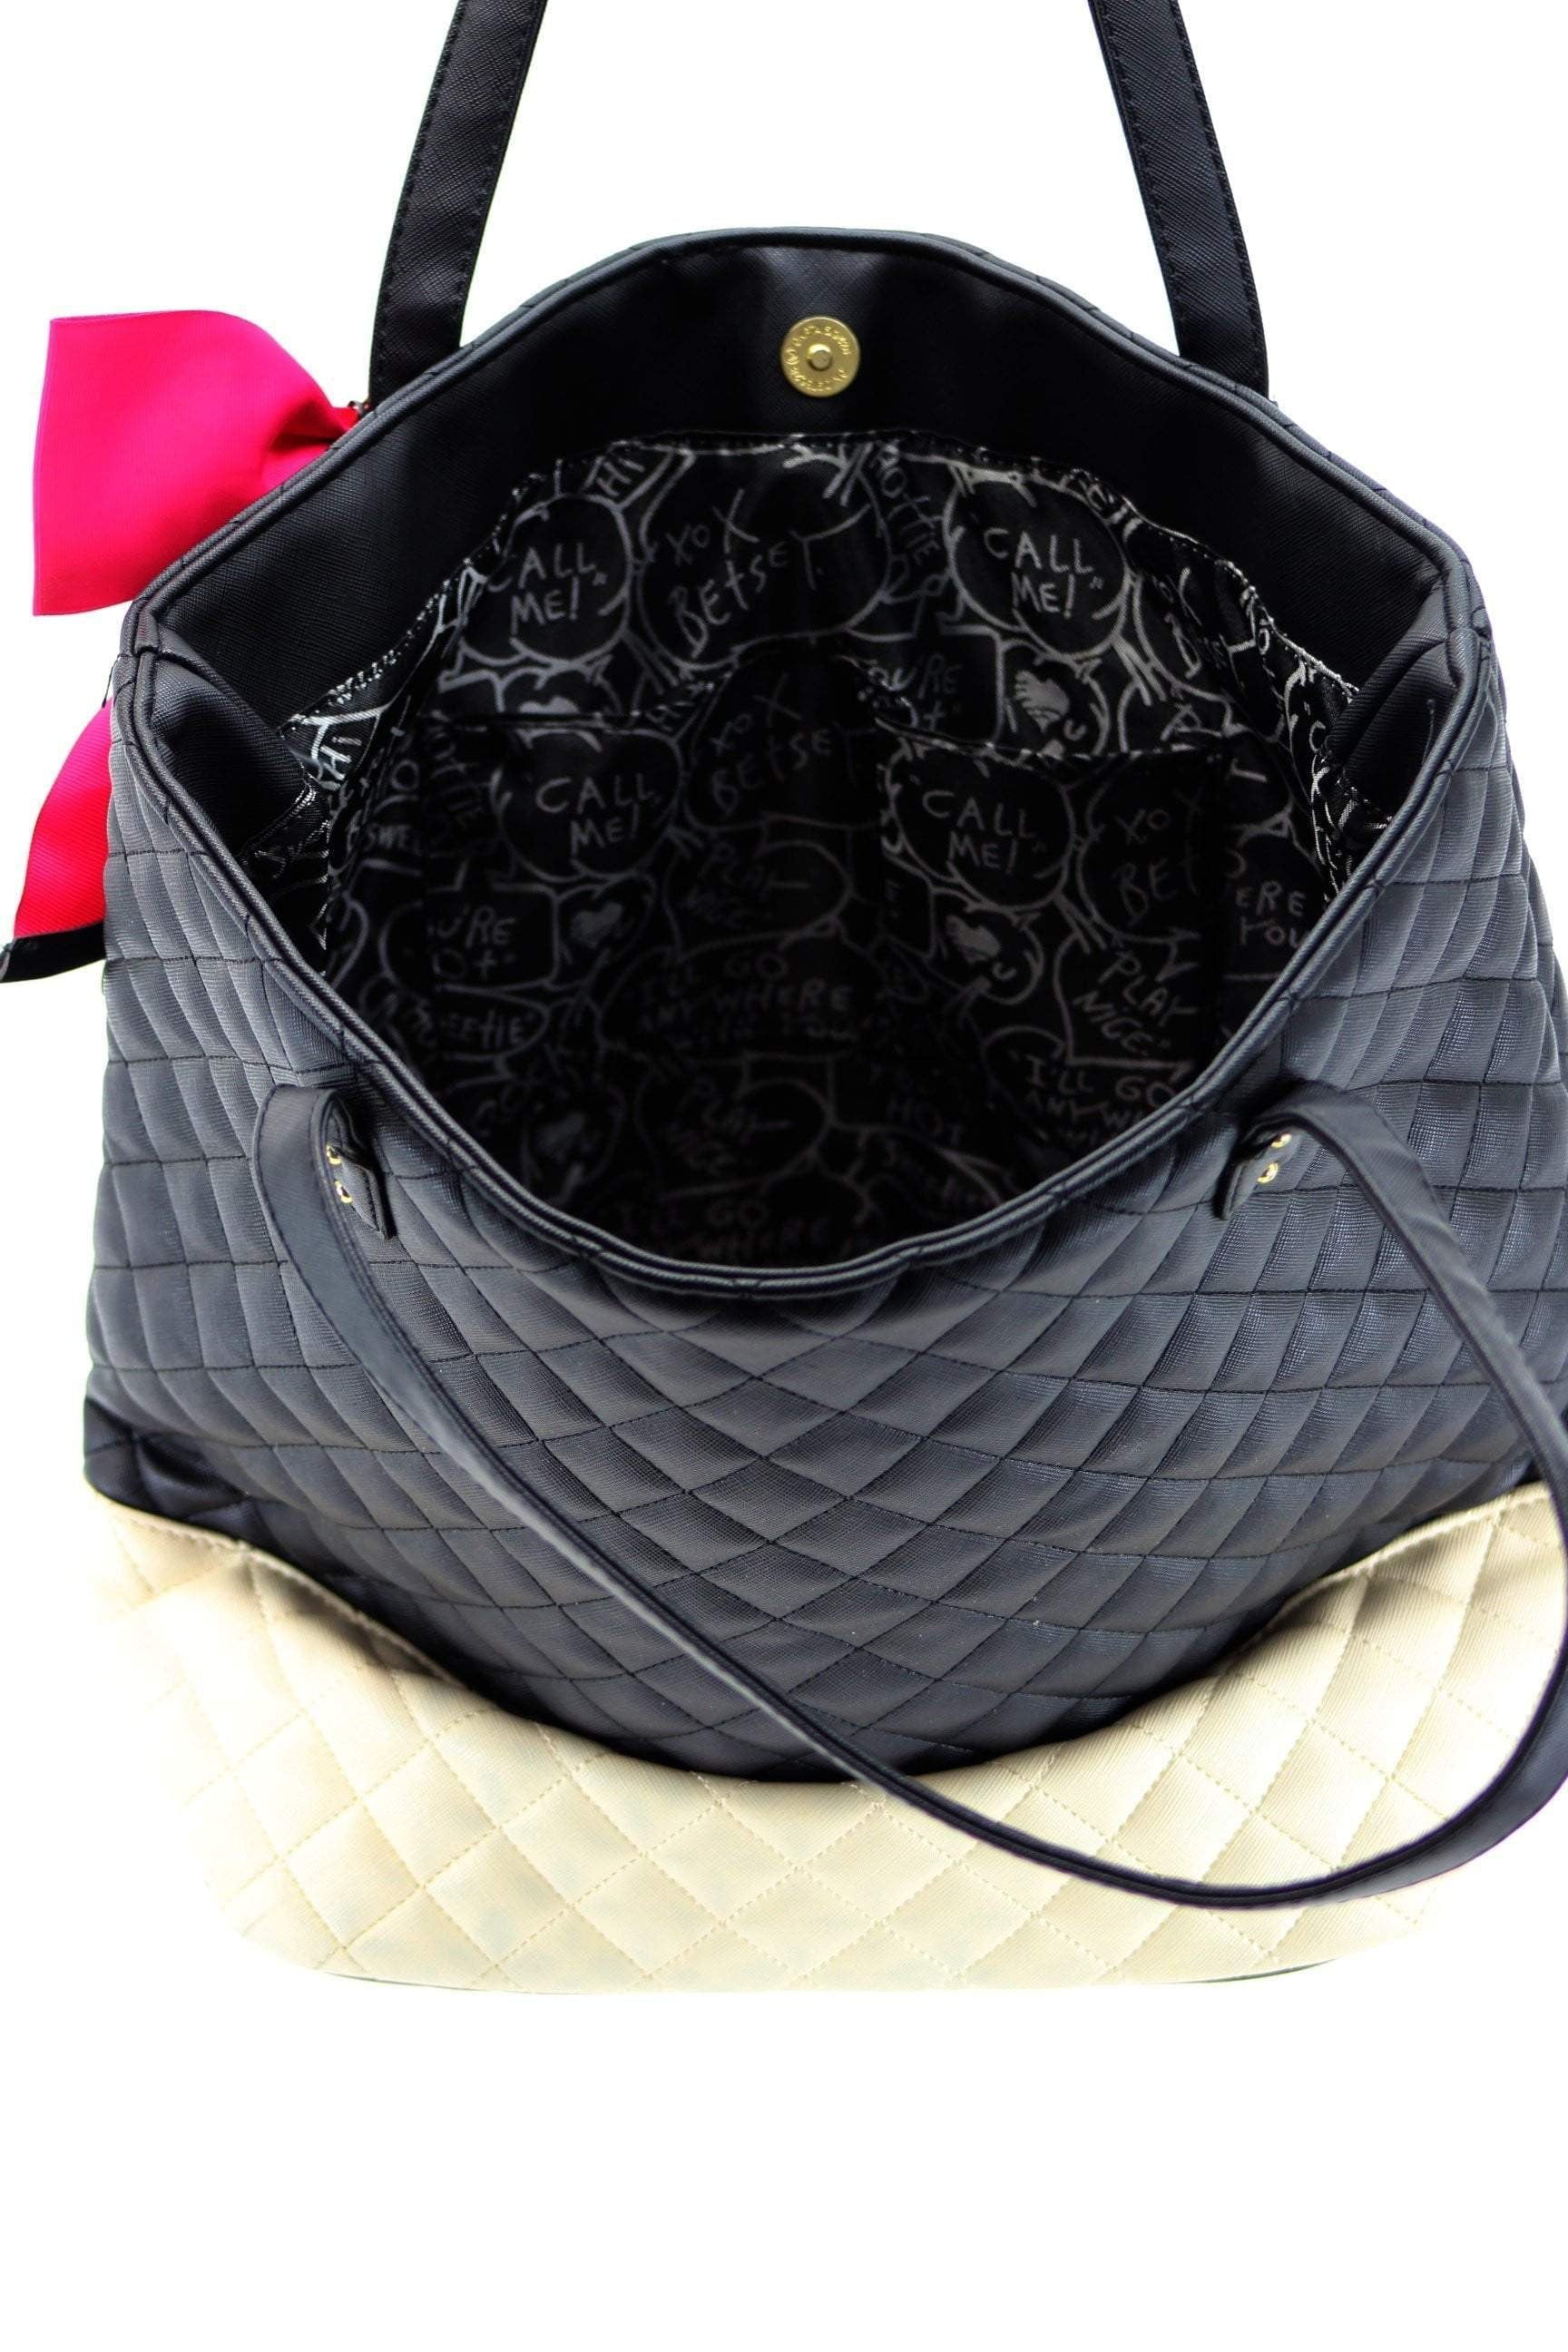 Betsey Johnson Quilted Satchel Bag - Black White Bow Heart weekender